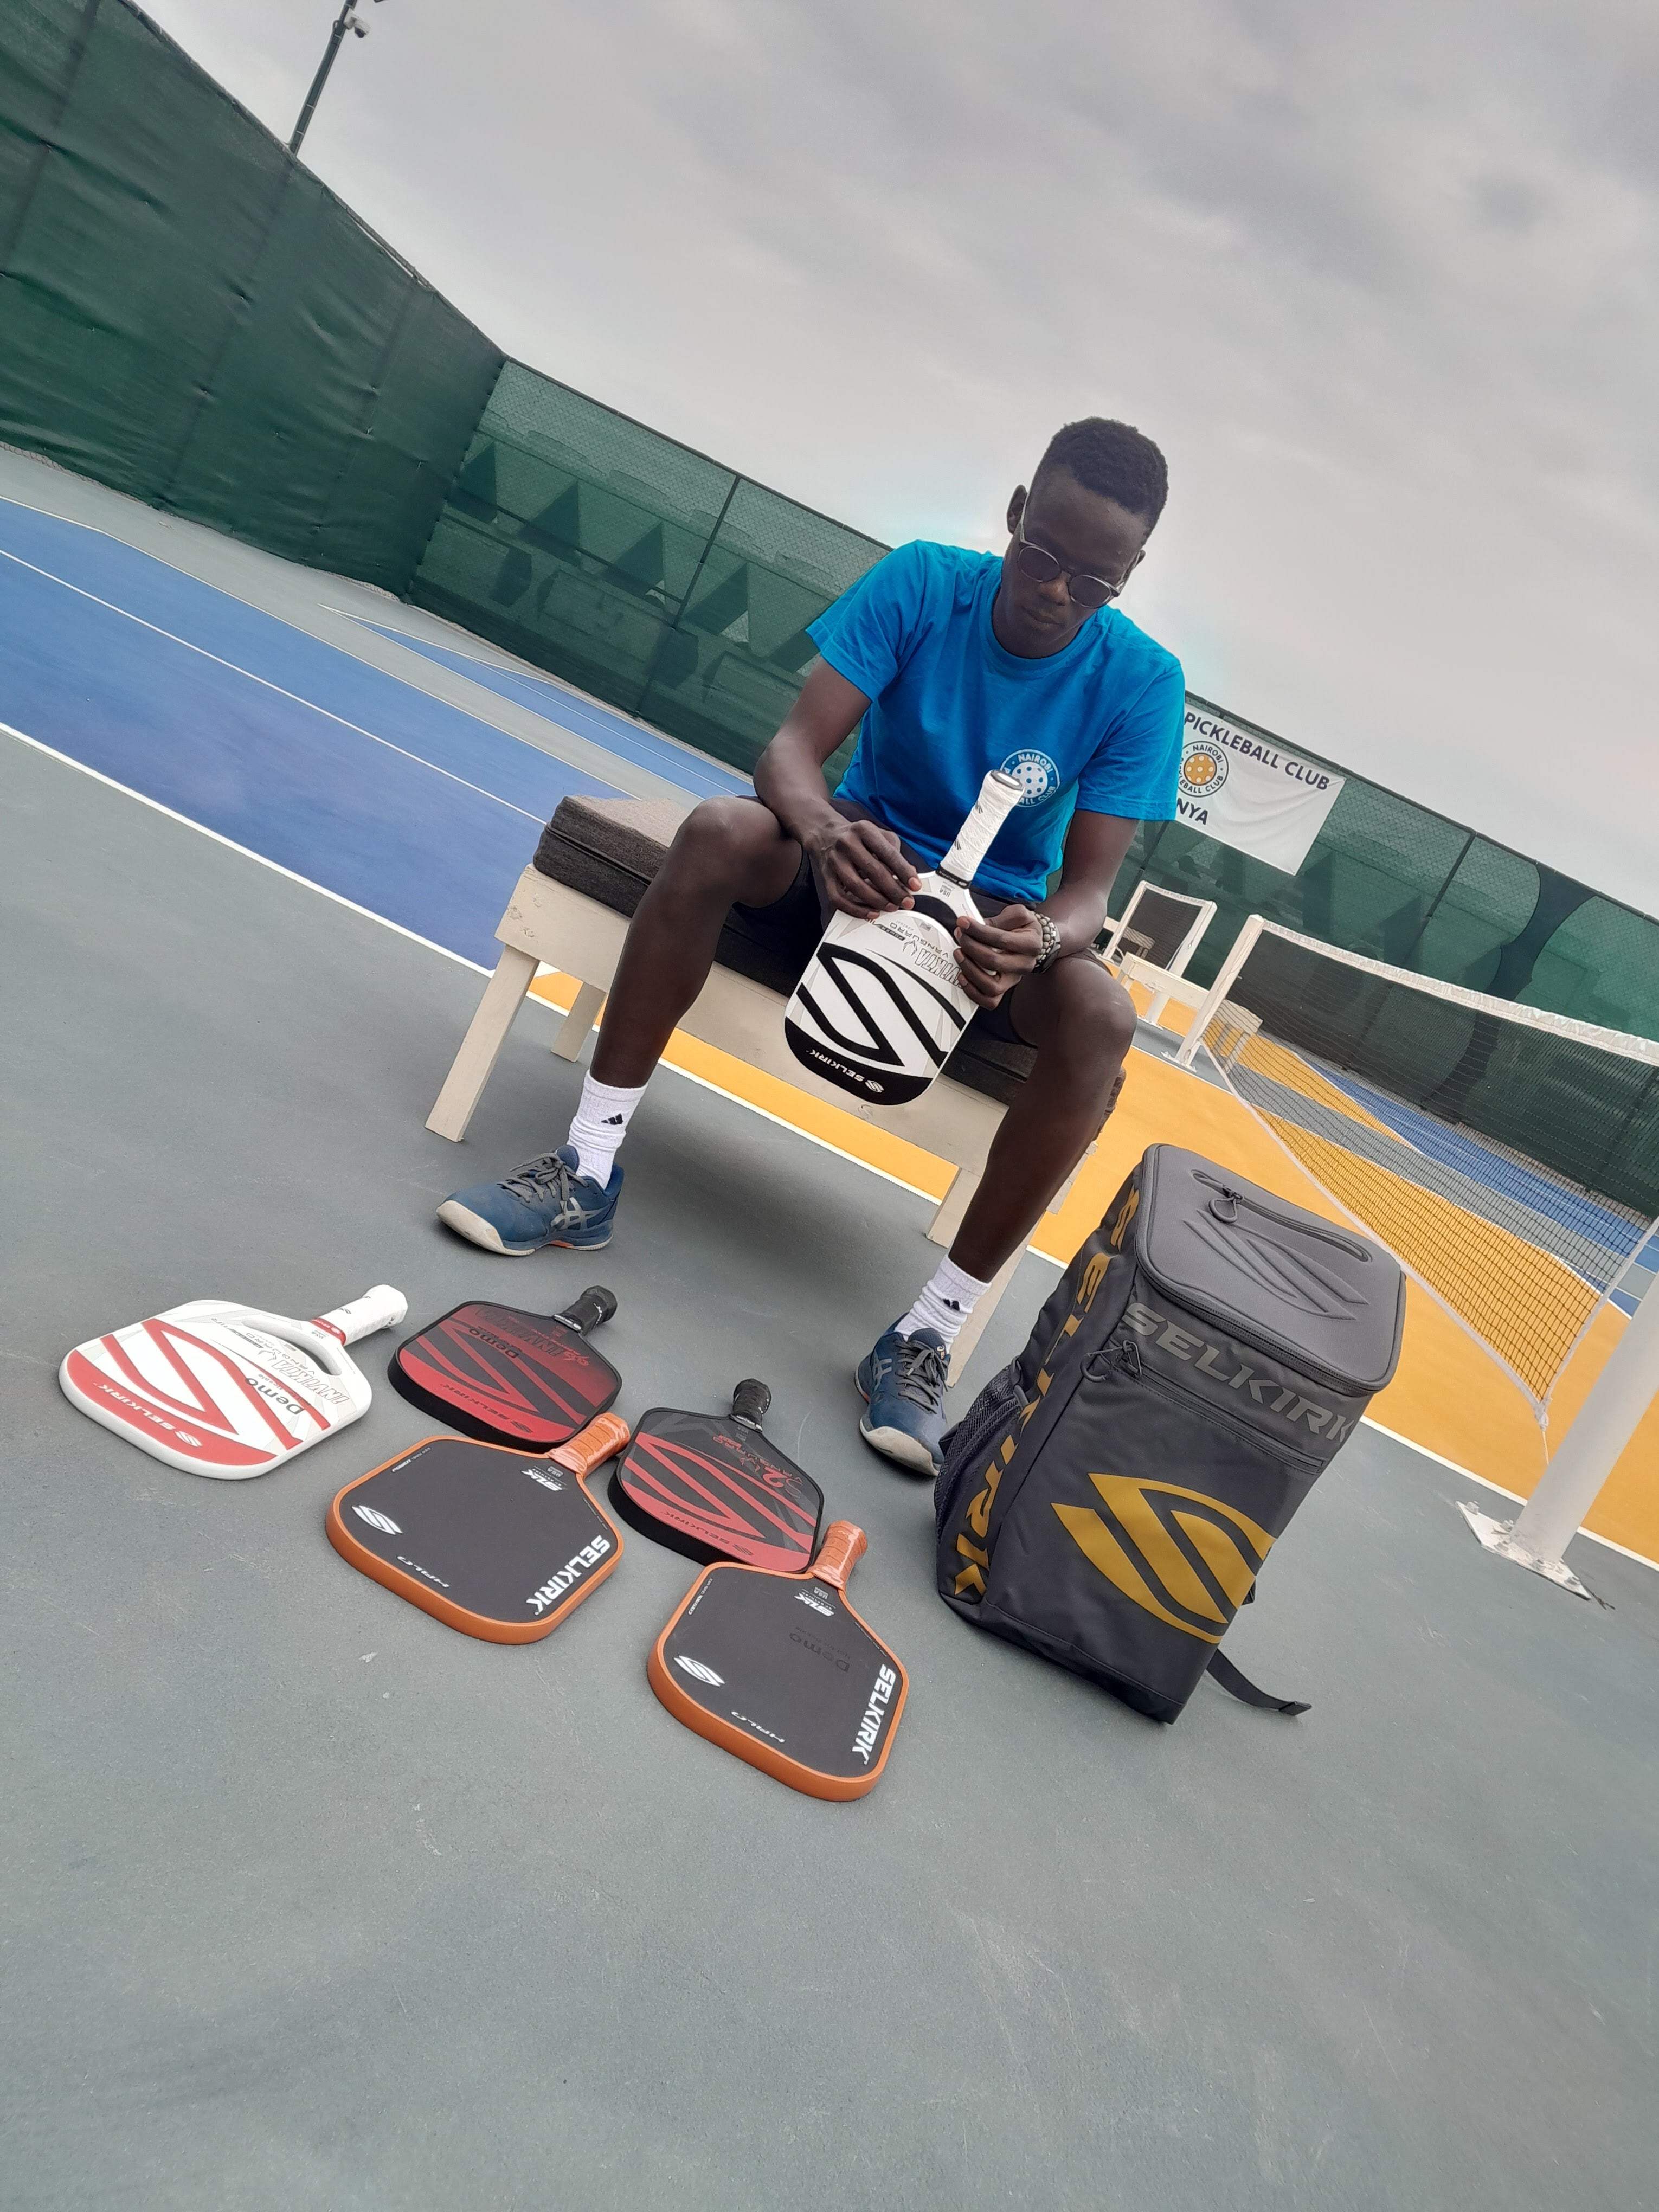 Brian Omwando is helping spread the game of pickleball in Africa